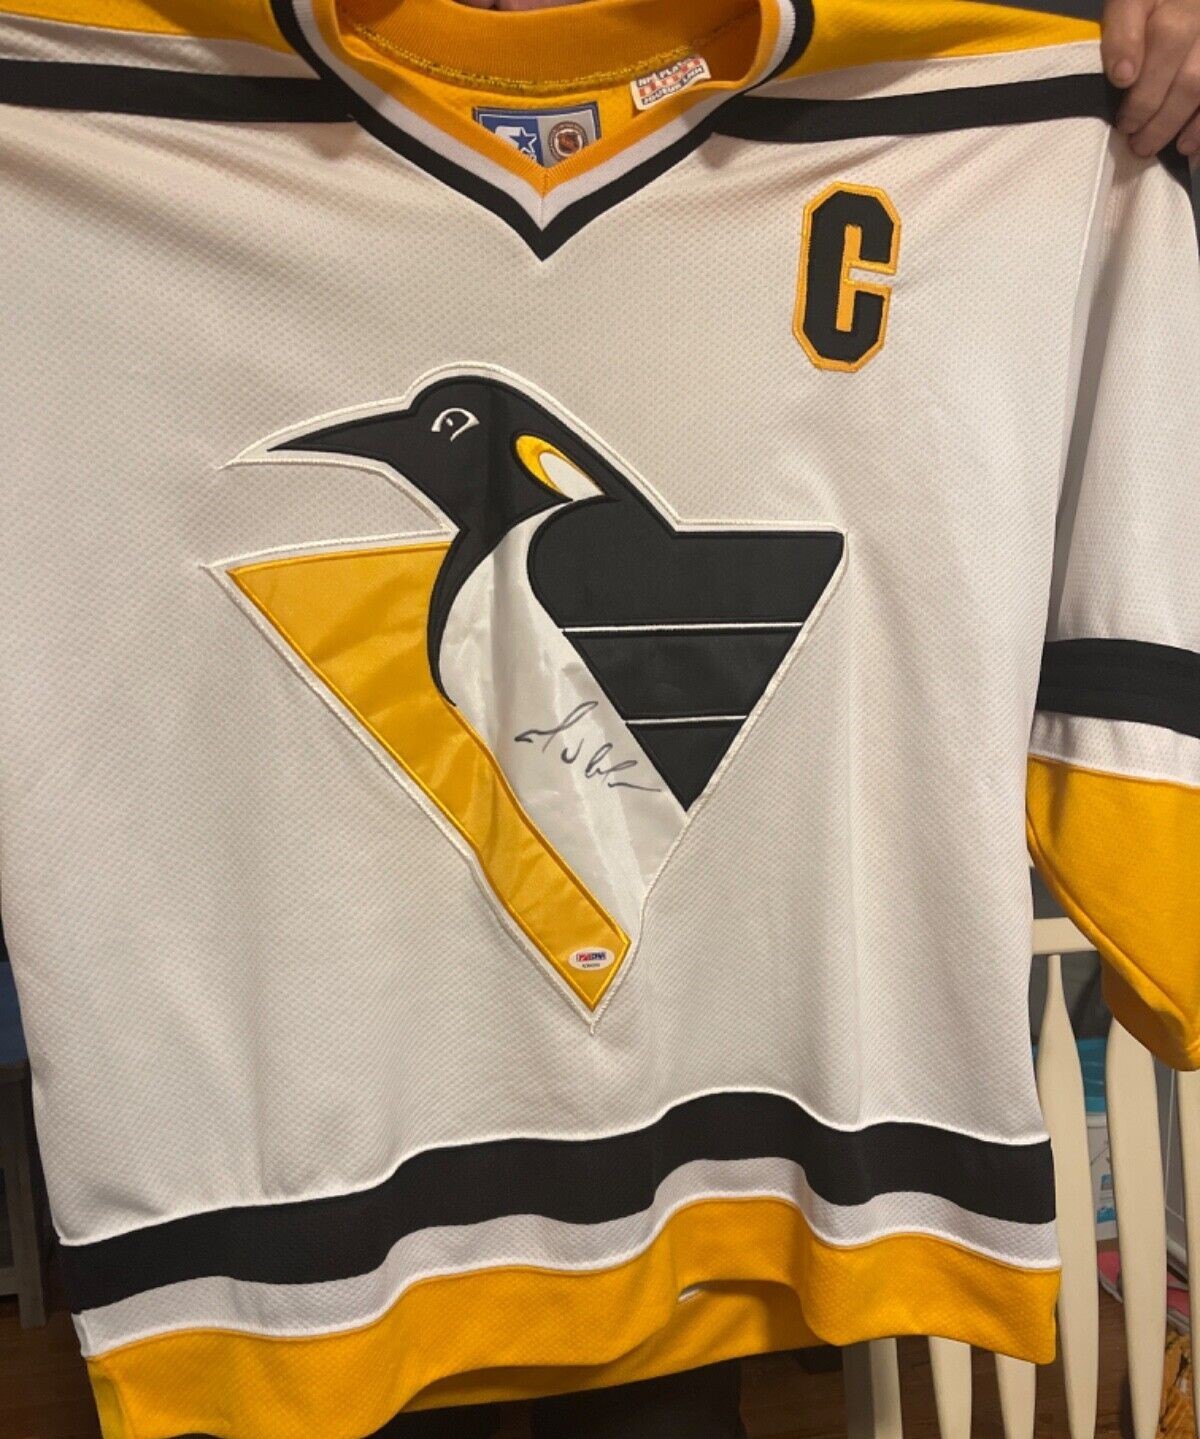 Mario Lemieux Shows Off New Jersey 